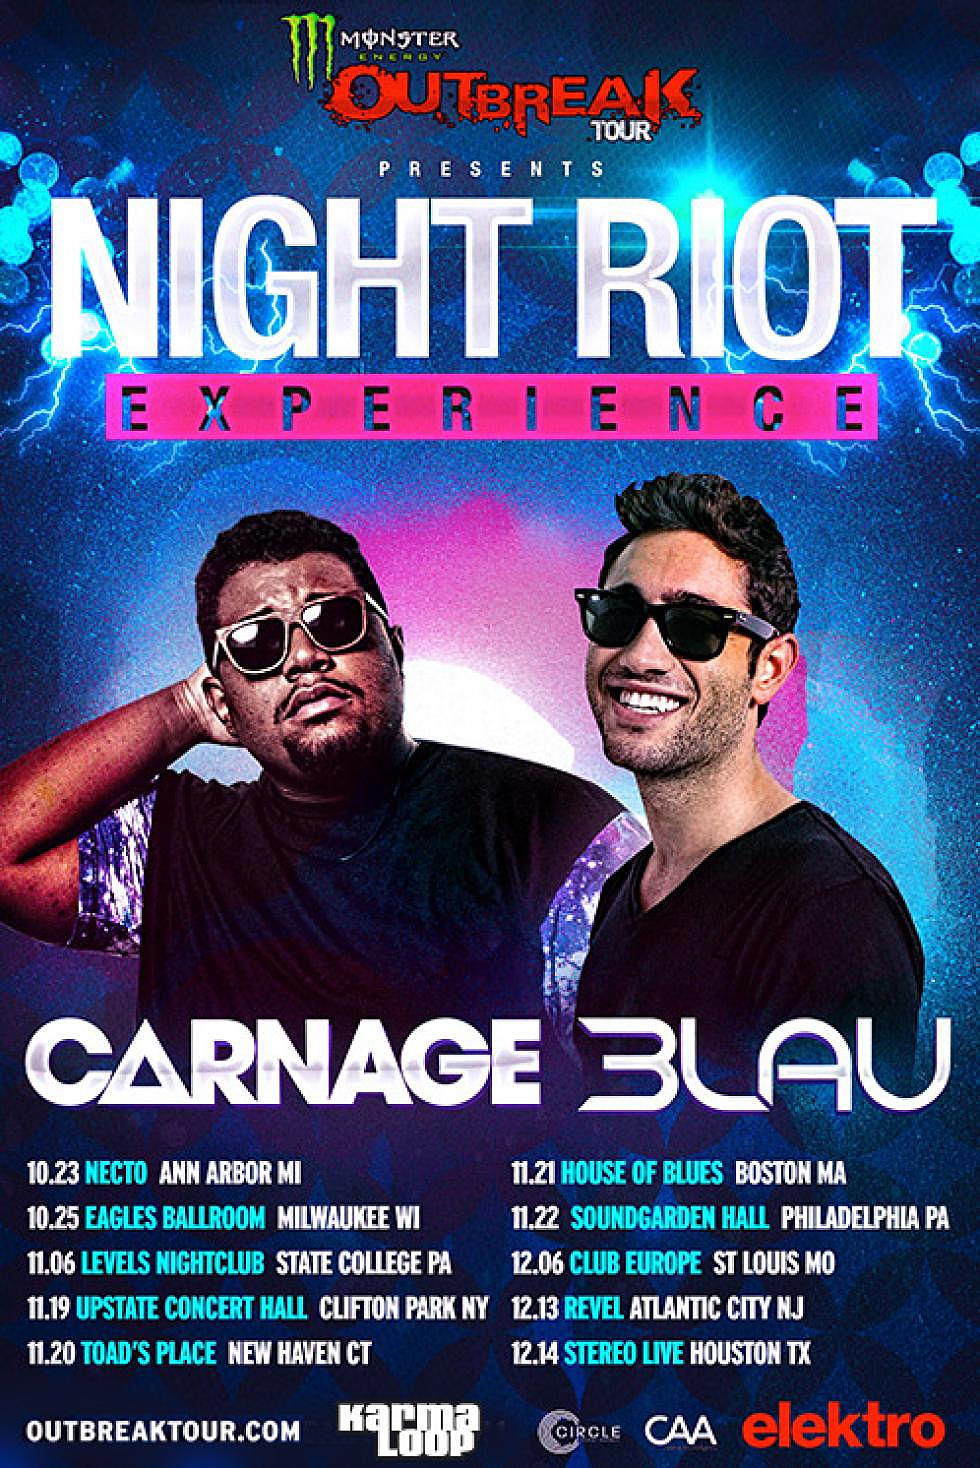 Monster Energy Outbreak Tour presents: &#8216;Night Riot Experience&#8217; with Carnage &#038; 3LAU + Win a VIP add-on!